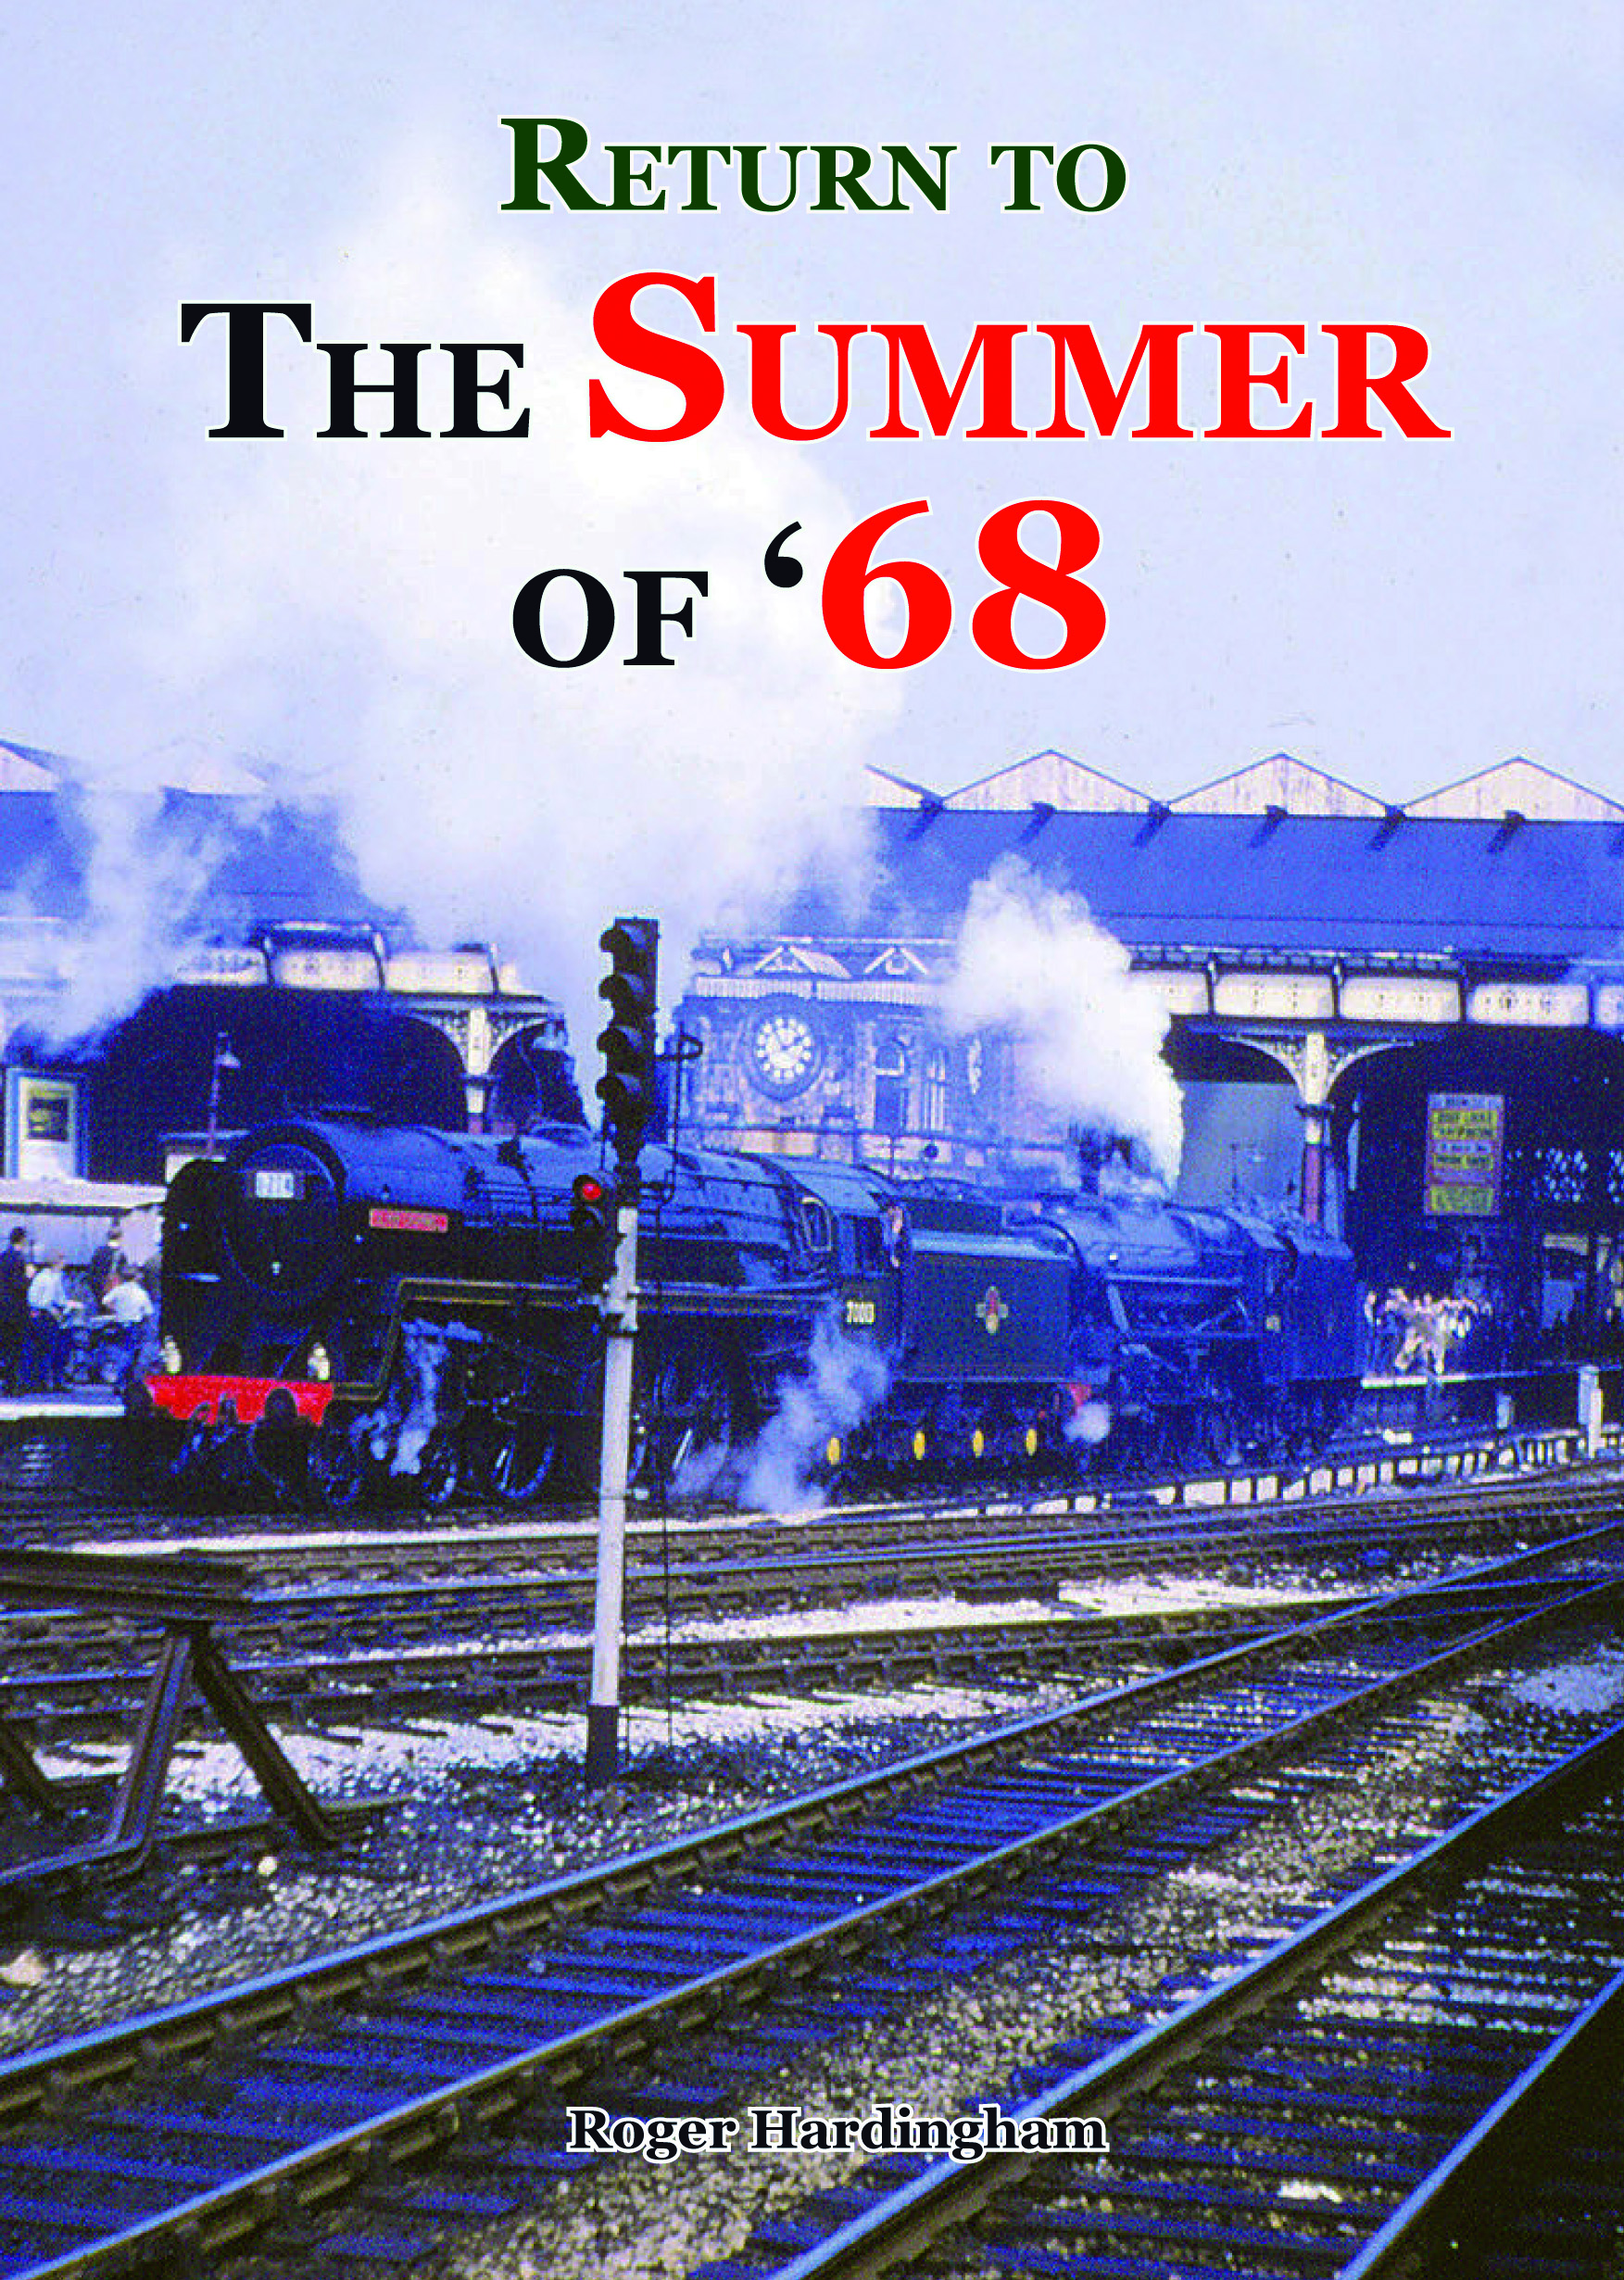 Return to the Summer of '68